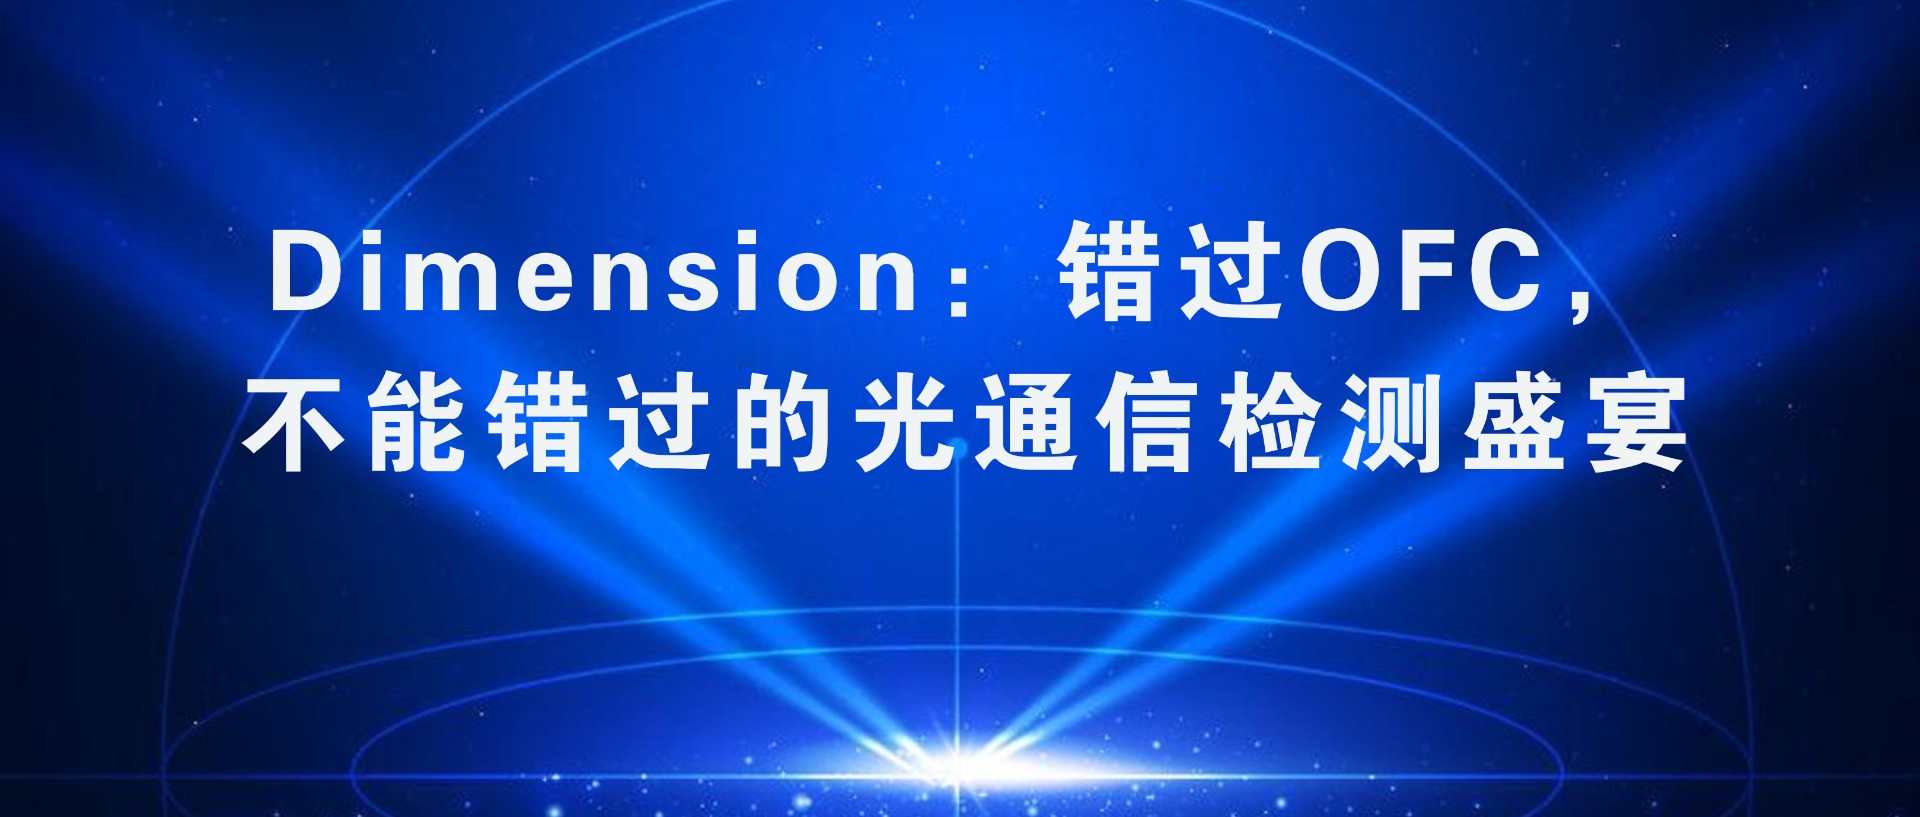 Dimension: Missing OFC, The feast of optical communication inspection not to be missed